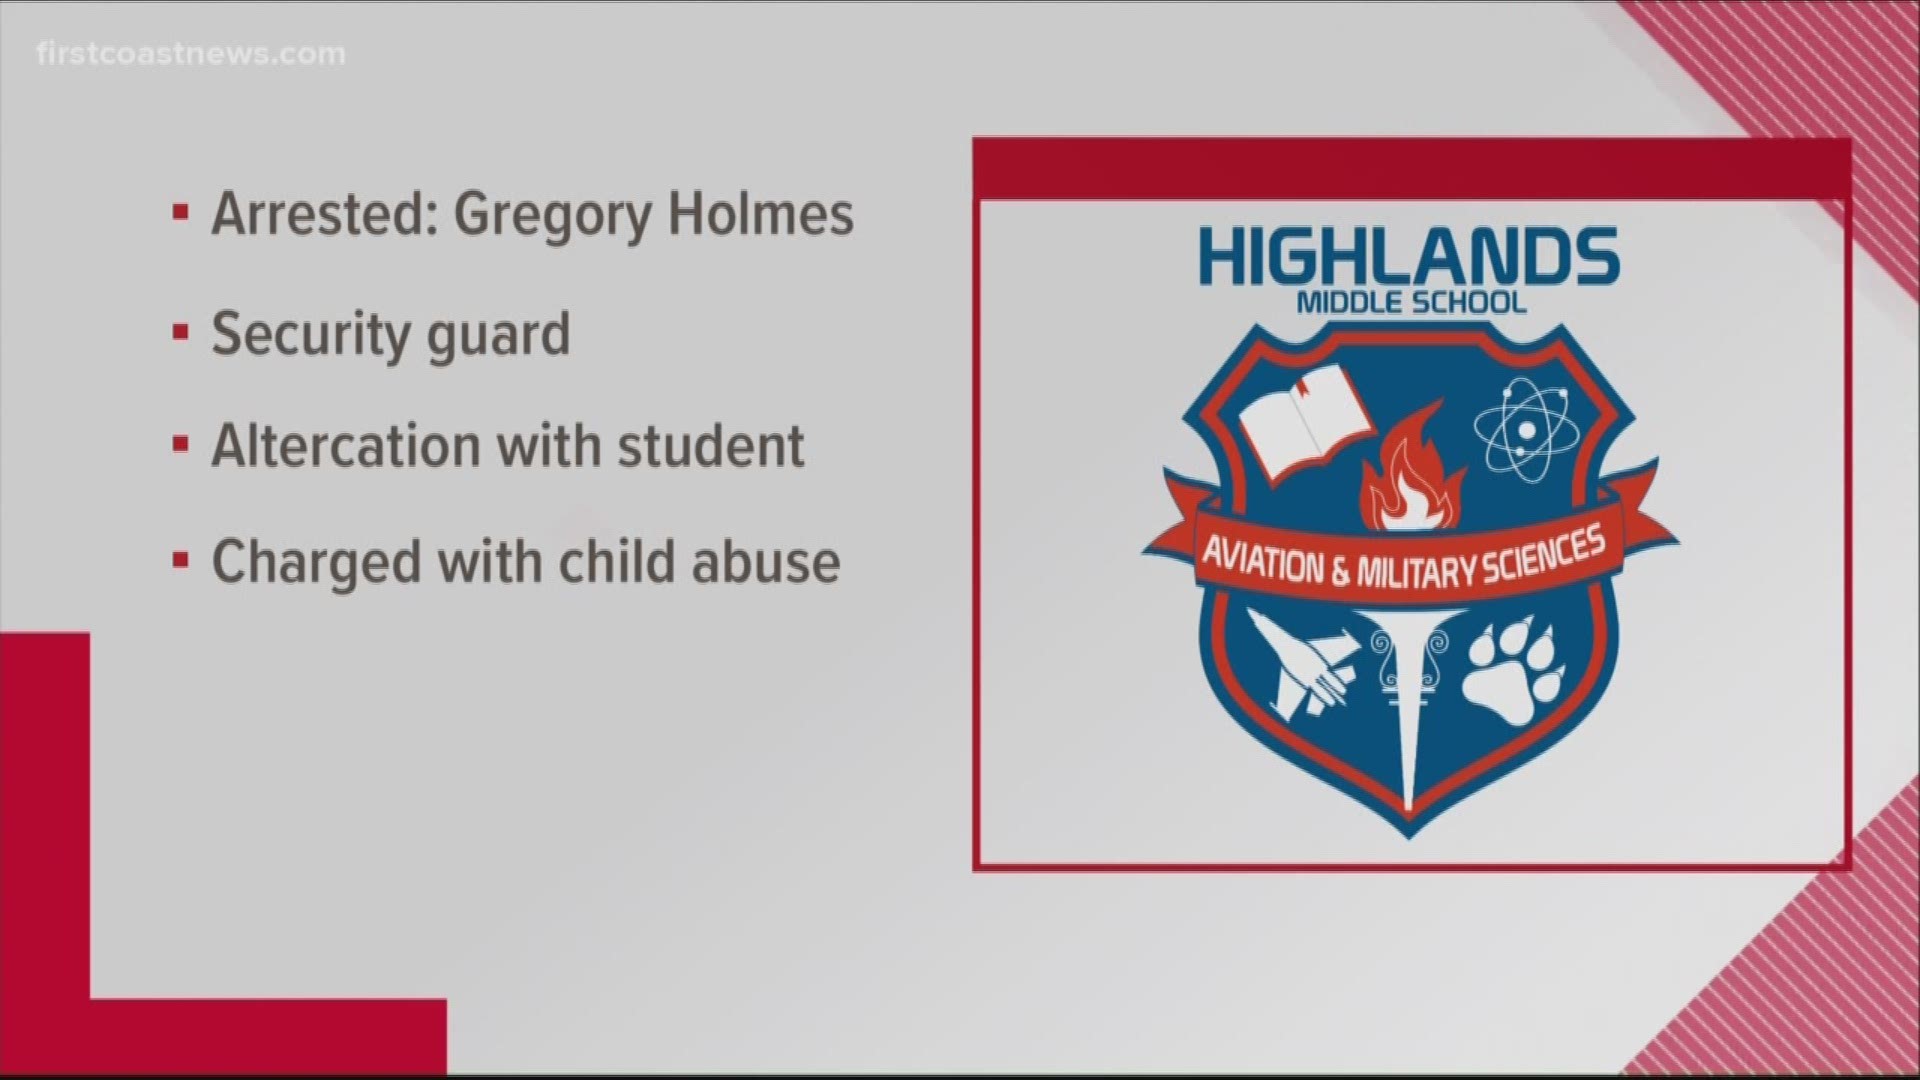 A Duval County Public Schools release said Gregory Holmes was taken into custody following a Feb. 11 incident involving a student.